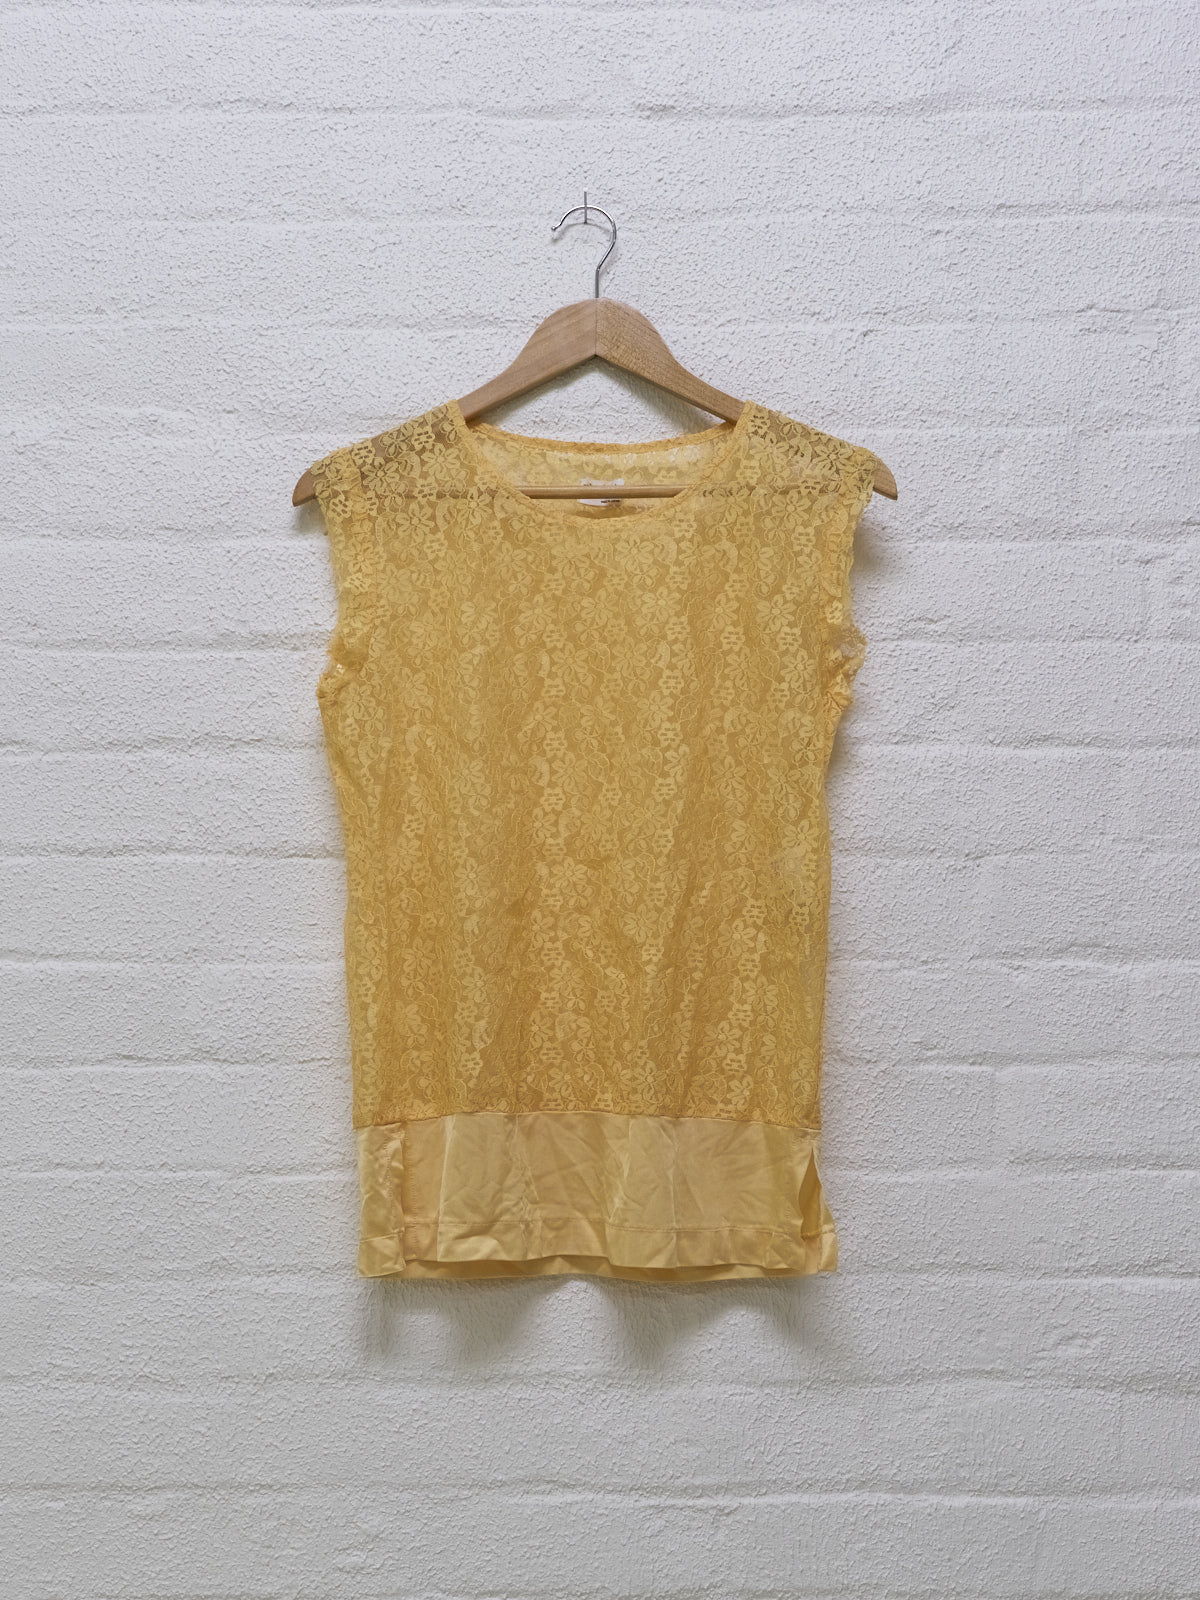 Comme des Garcons 1995 lace sleeveless top with satin hem panel - womens S